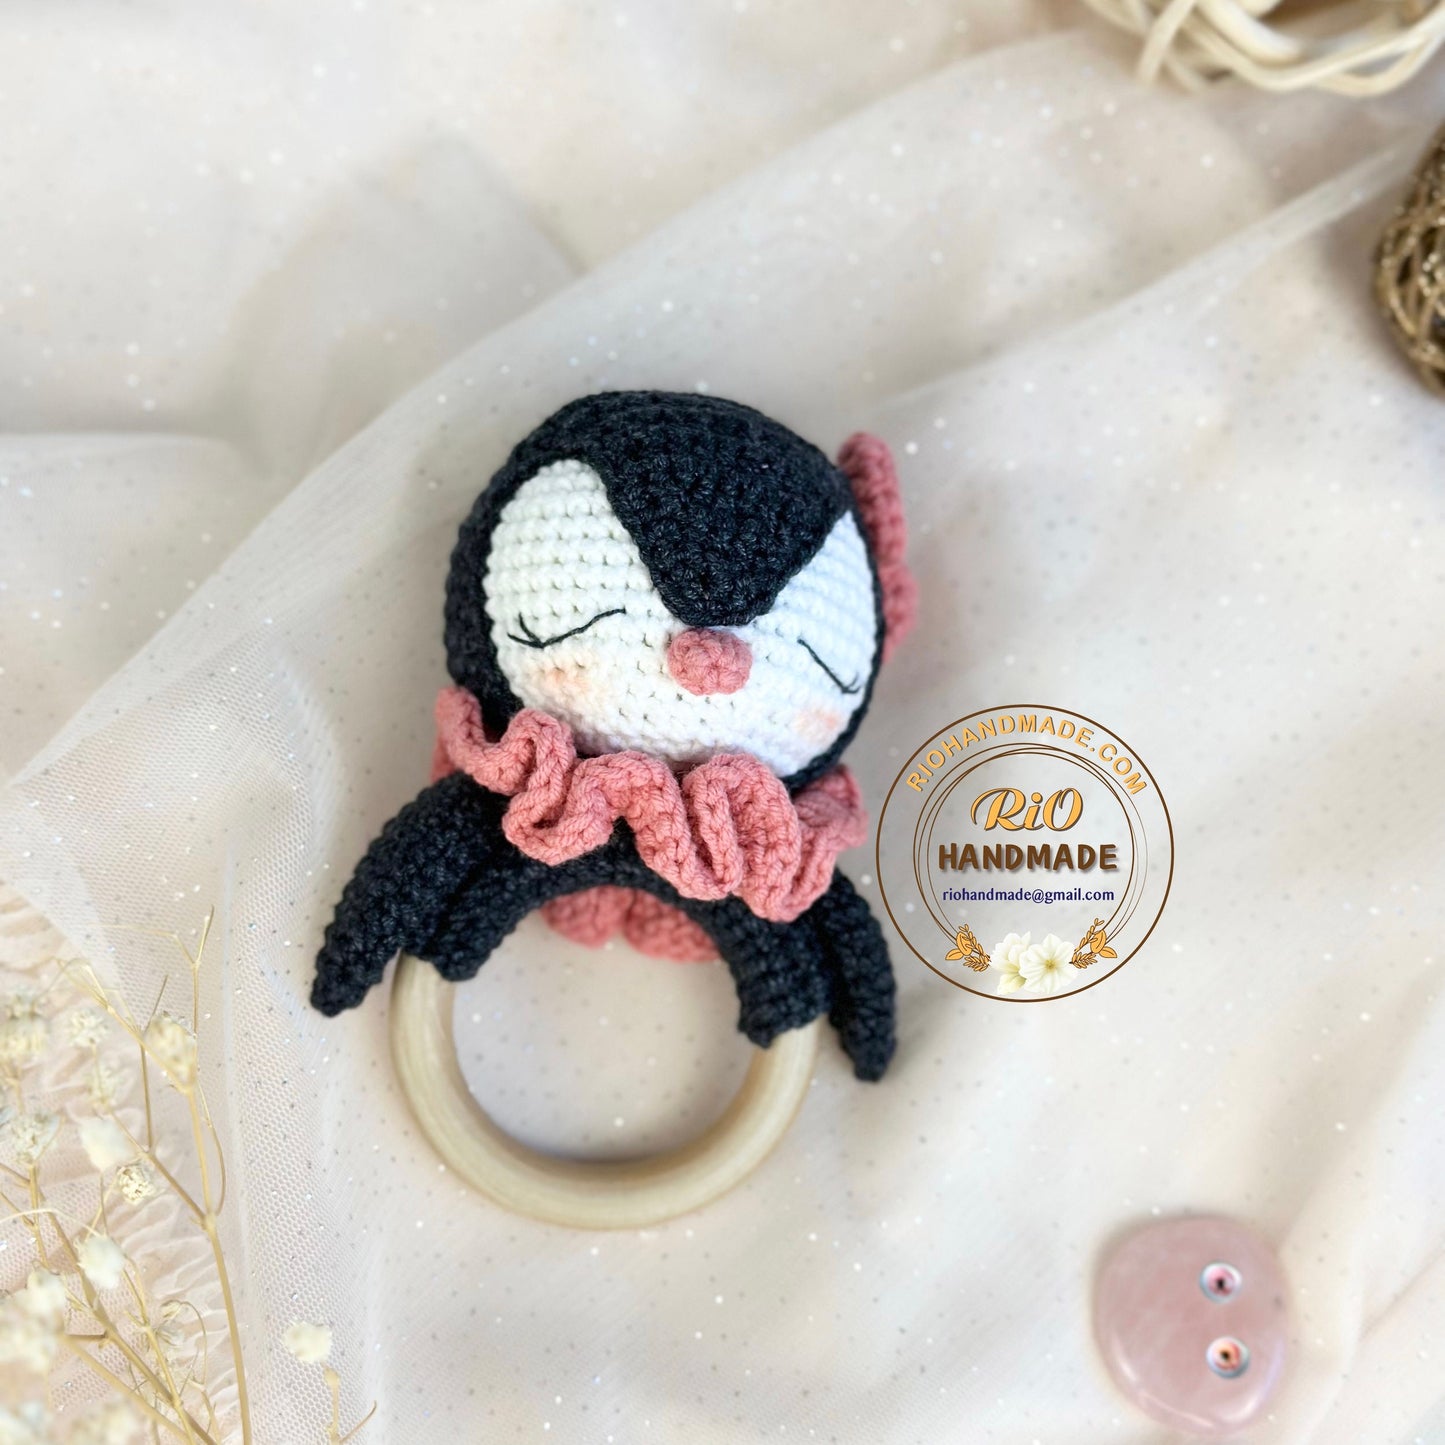 Personalized Baby Rattle, Crochet Penguin Rattle and Matching Toy, Animal Newborn Baby Rattle, Baby Crochet Rattle Gift, Baby Shower Gift